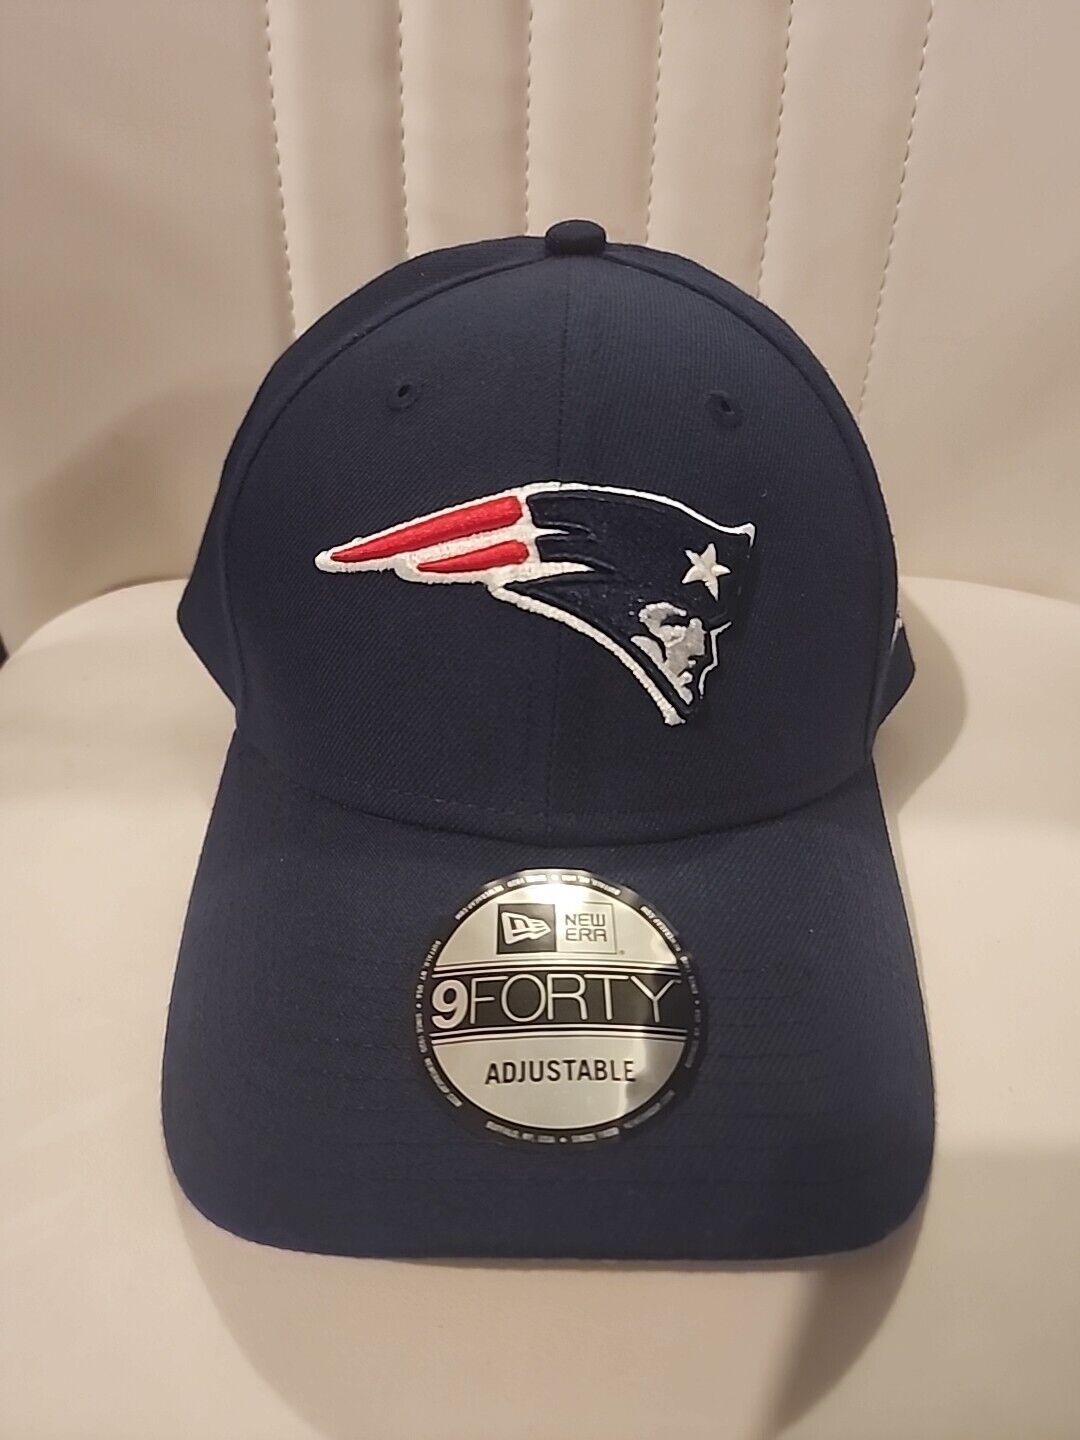 New England Patriots New Era NFL 9Forty Adjustable Cap Hat, One Size NEW